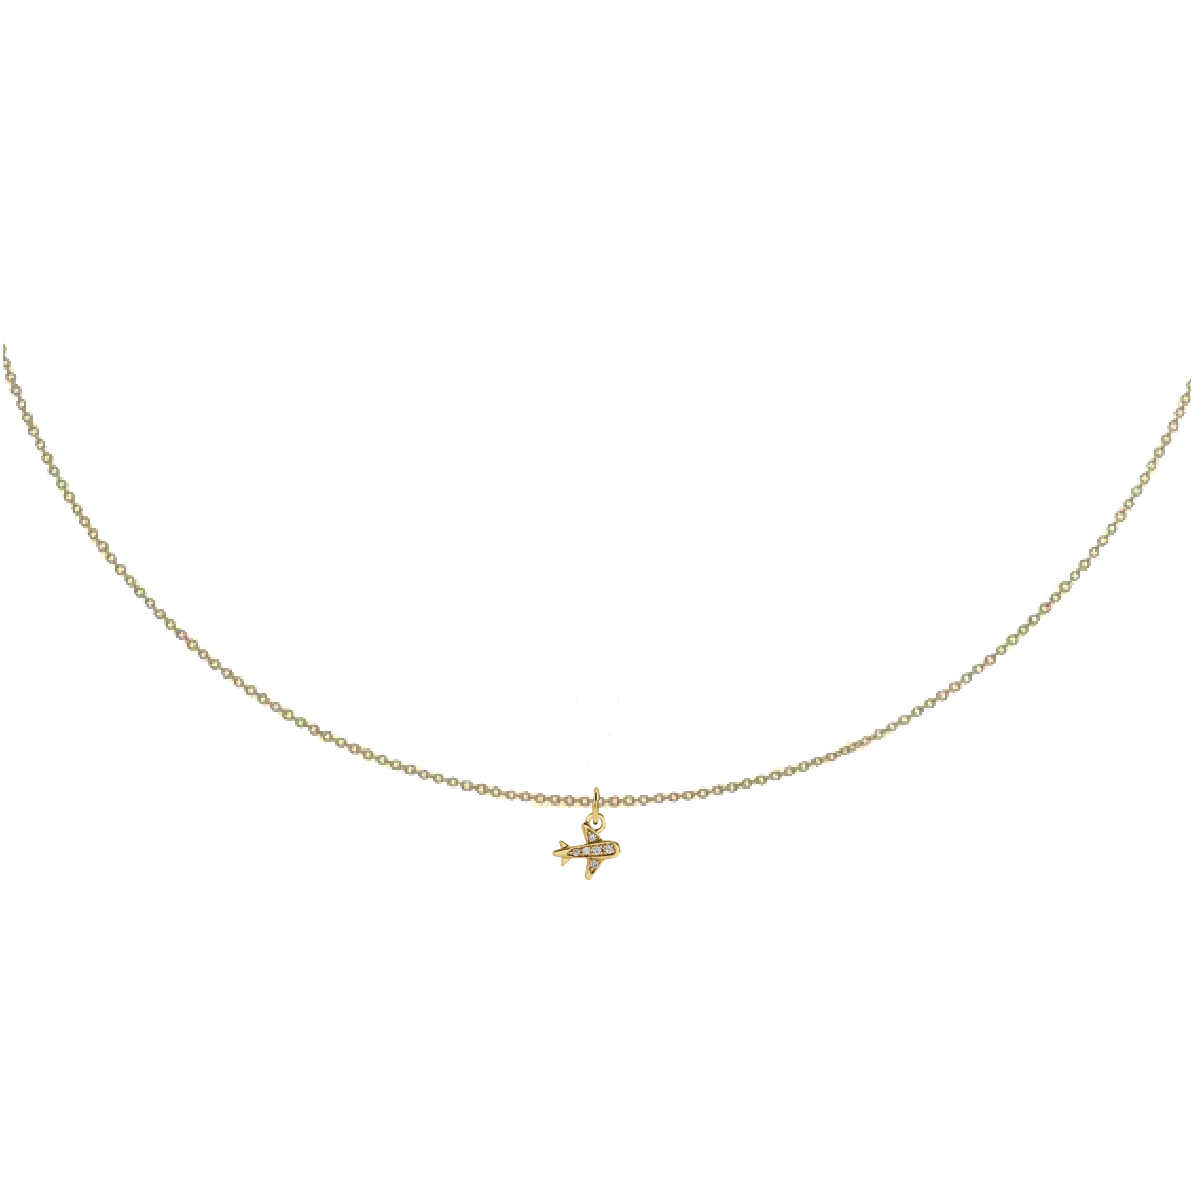 Charm Collection - For the Jet Setter Robyn Canady Charm + 14K Gold Filled Chain None 